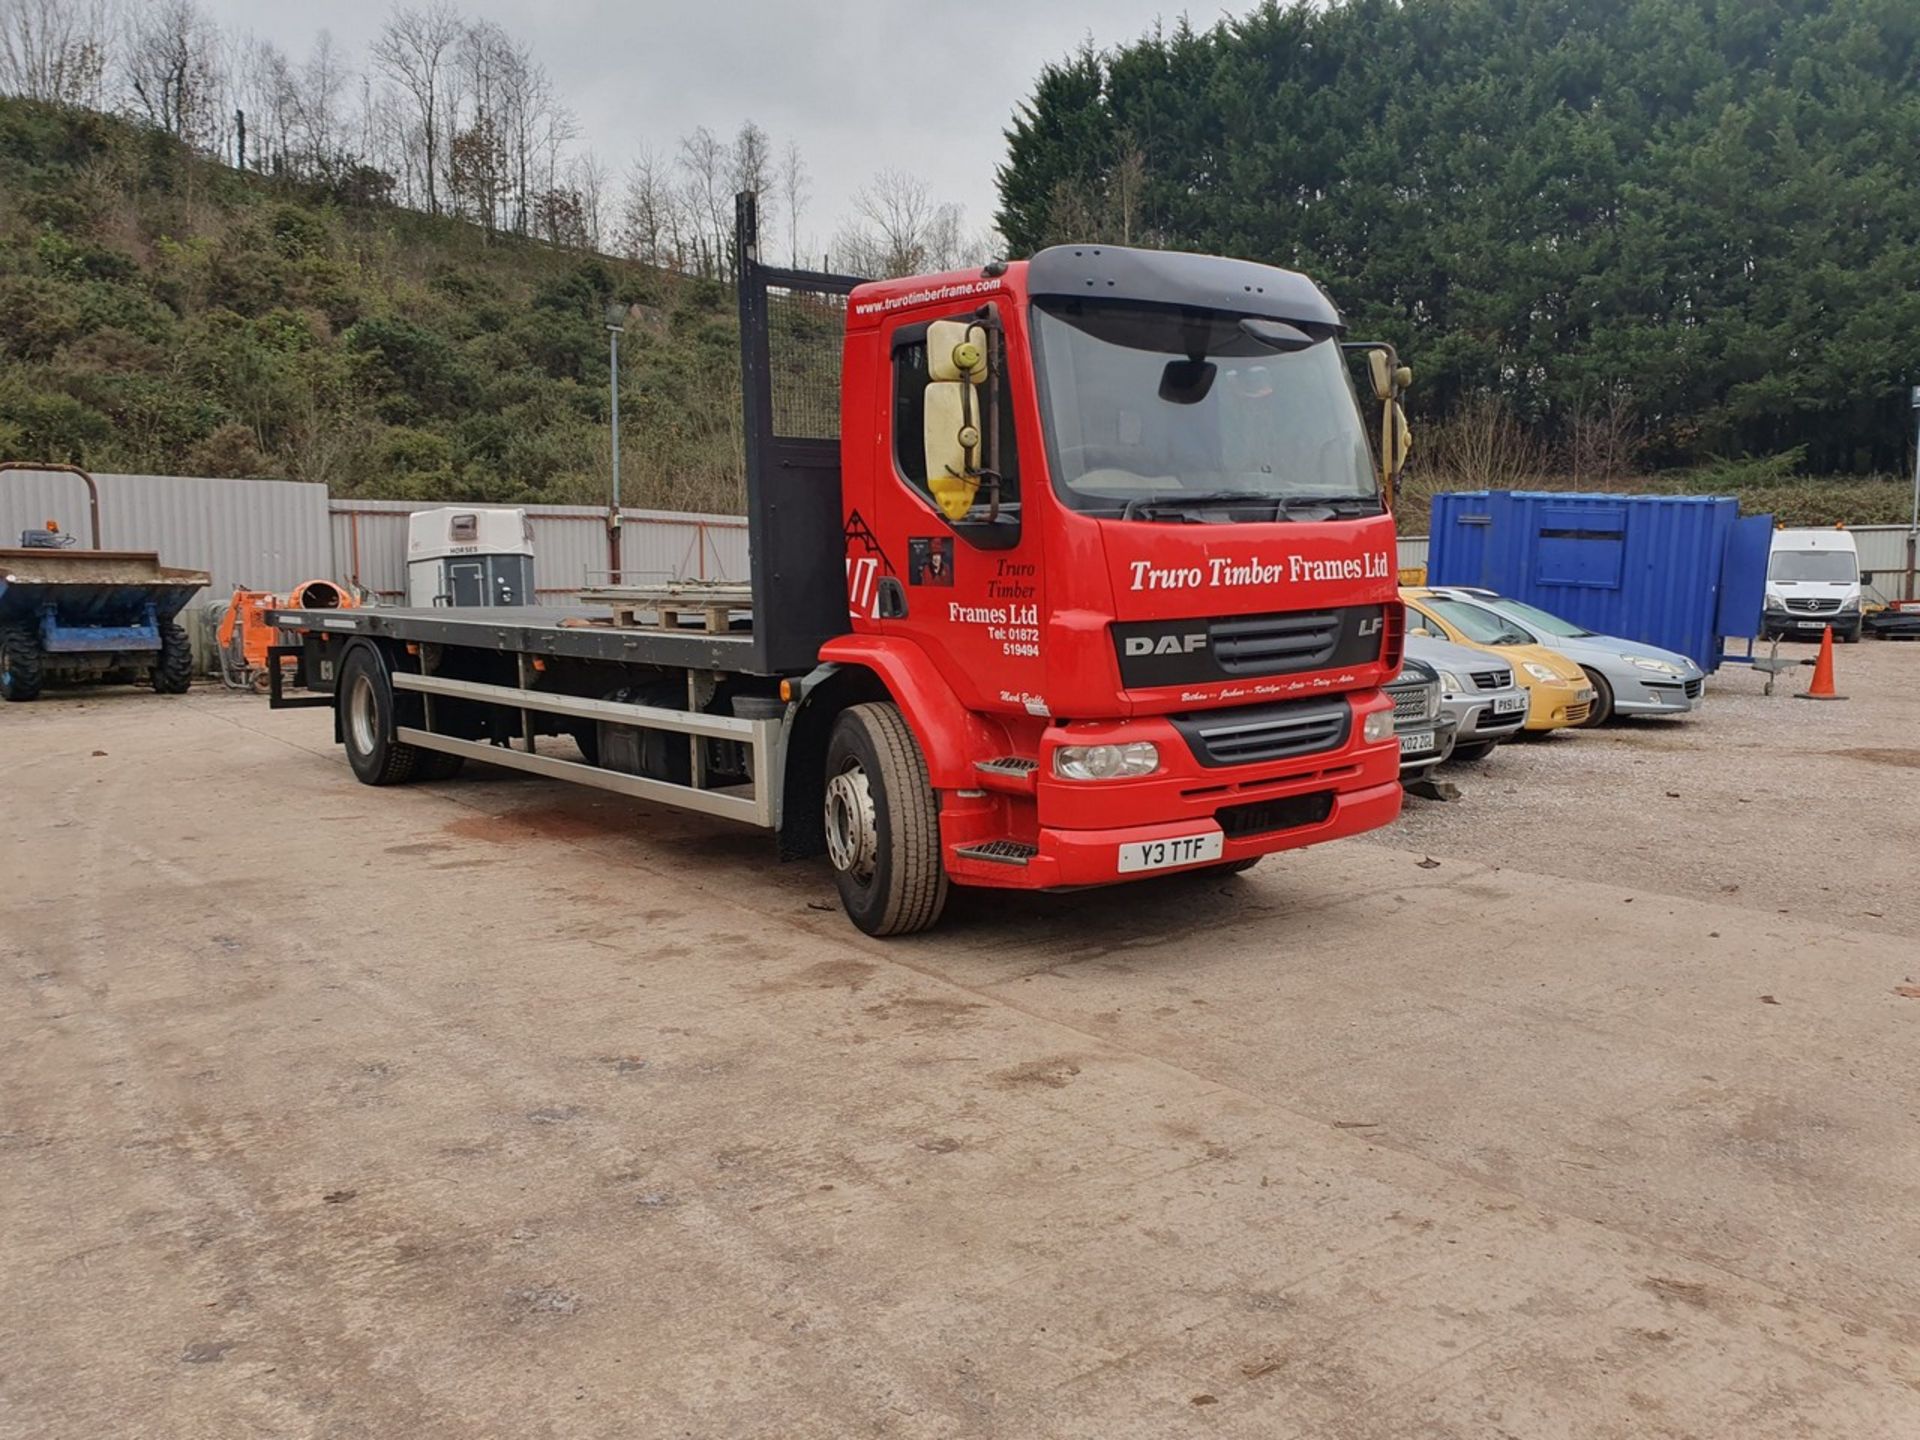 13/13 DAF TRUCKS FLAT BED - 6693cc 2dr (Red) - Image 6 of 23